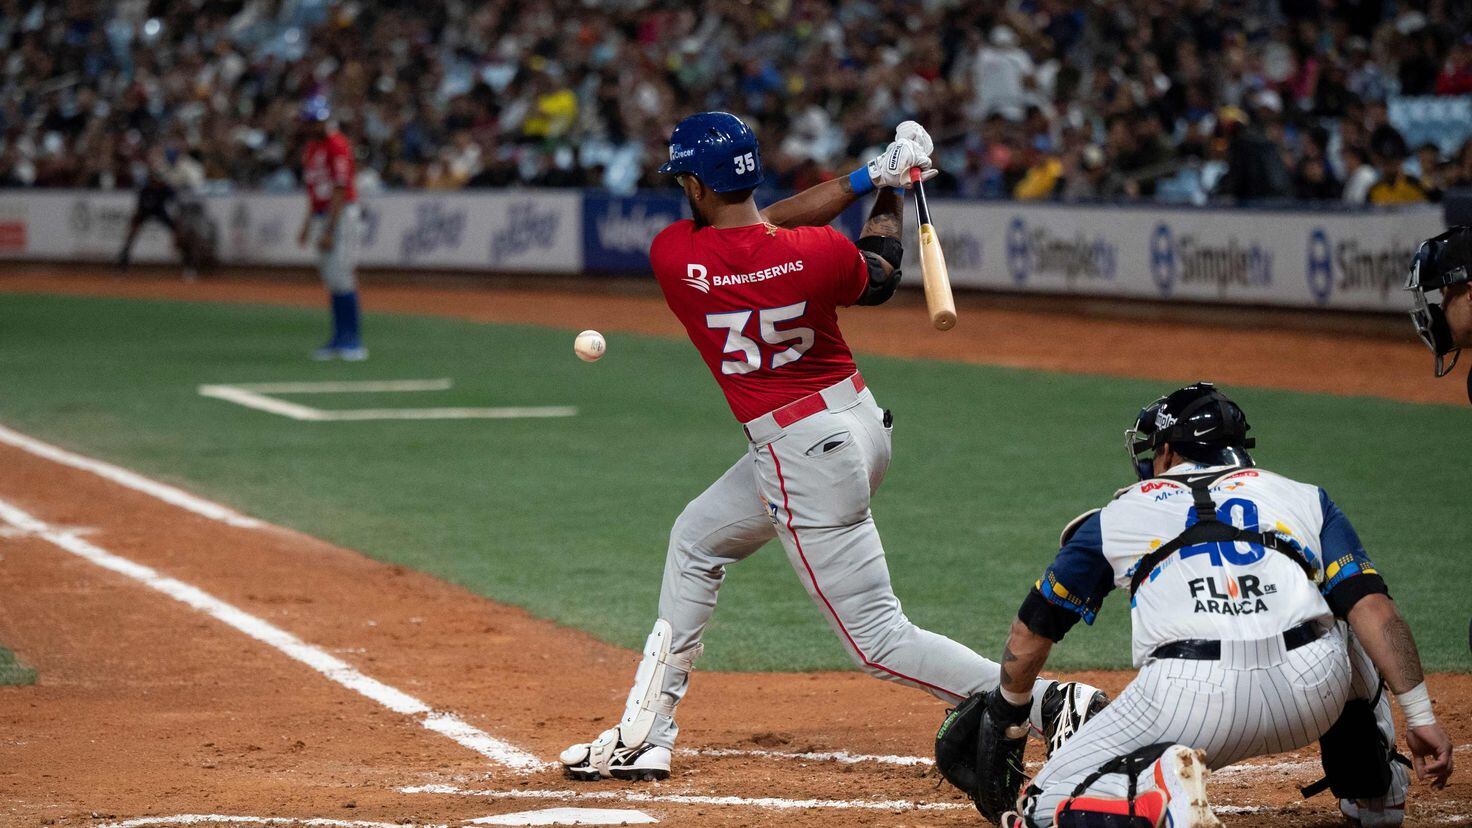 Highlights and scores: Dominicana 4 - 2 Mexico on 2021 Serie del Caribe